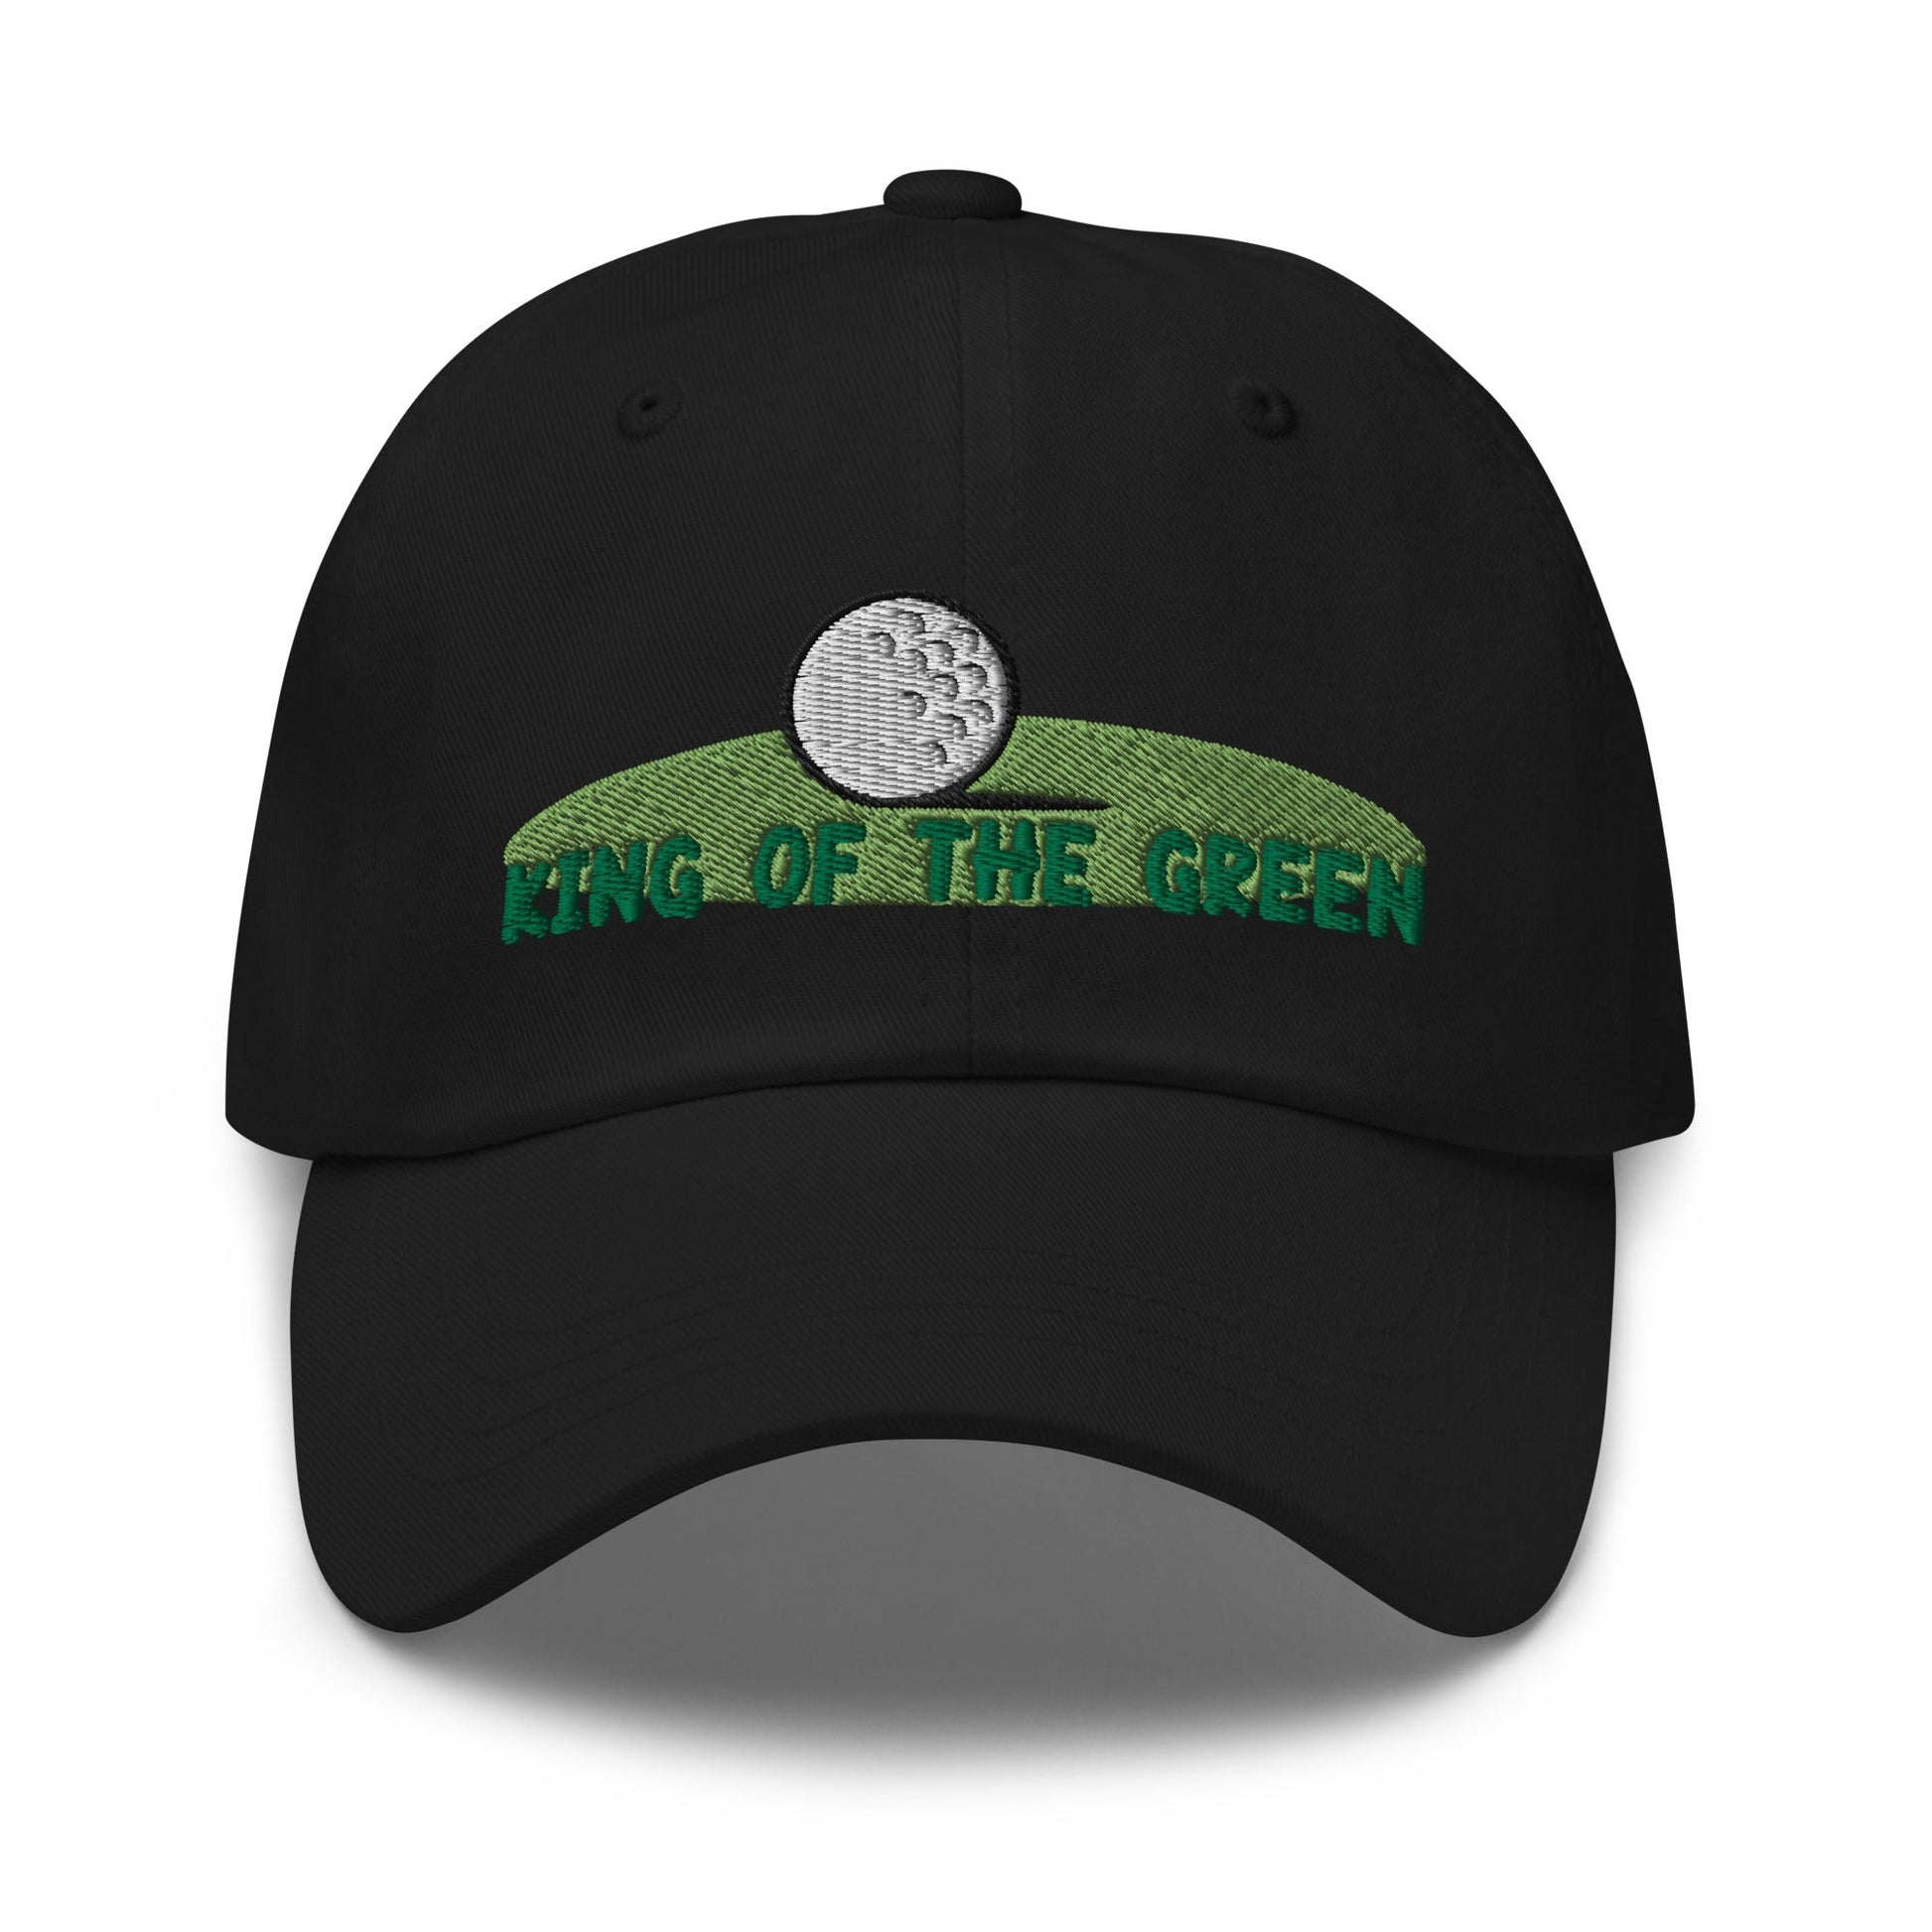 Funny Golfer Gifts  Dad Cap Black King of the Green Cap